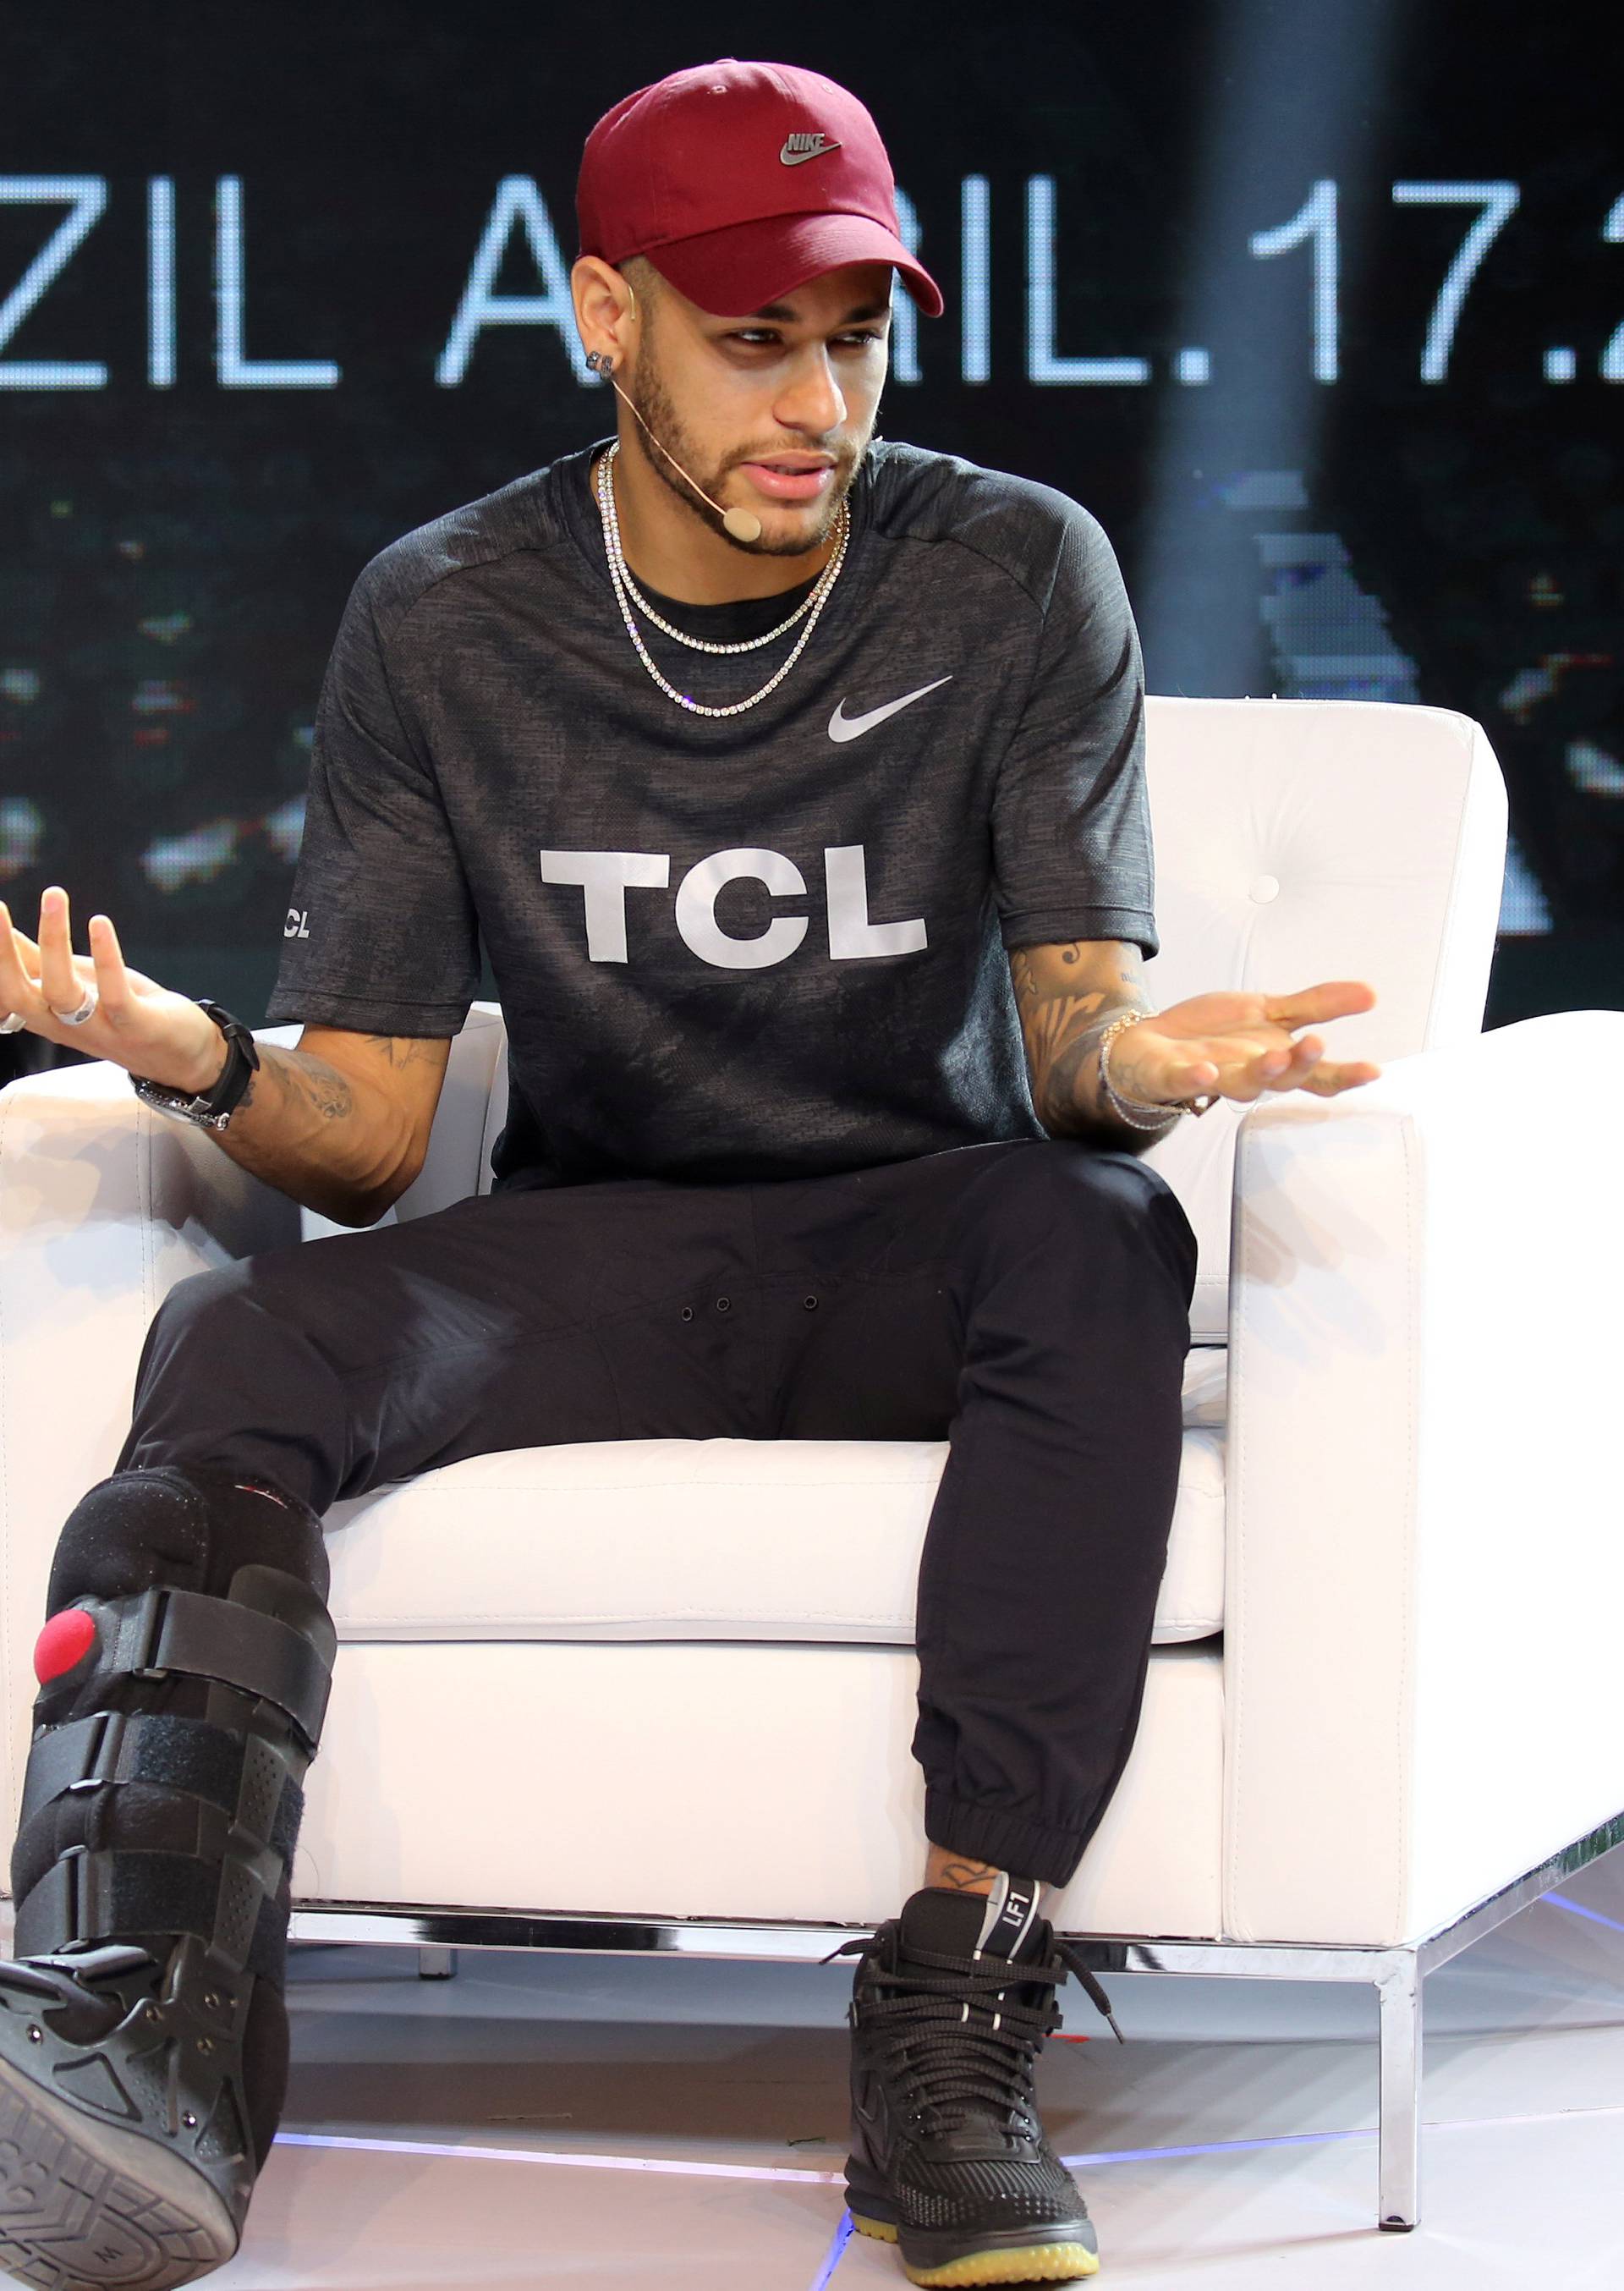 Brazilian soccer player Neymar attends a promotional event in Sao Paulo